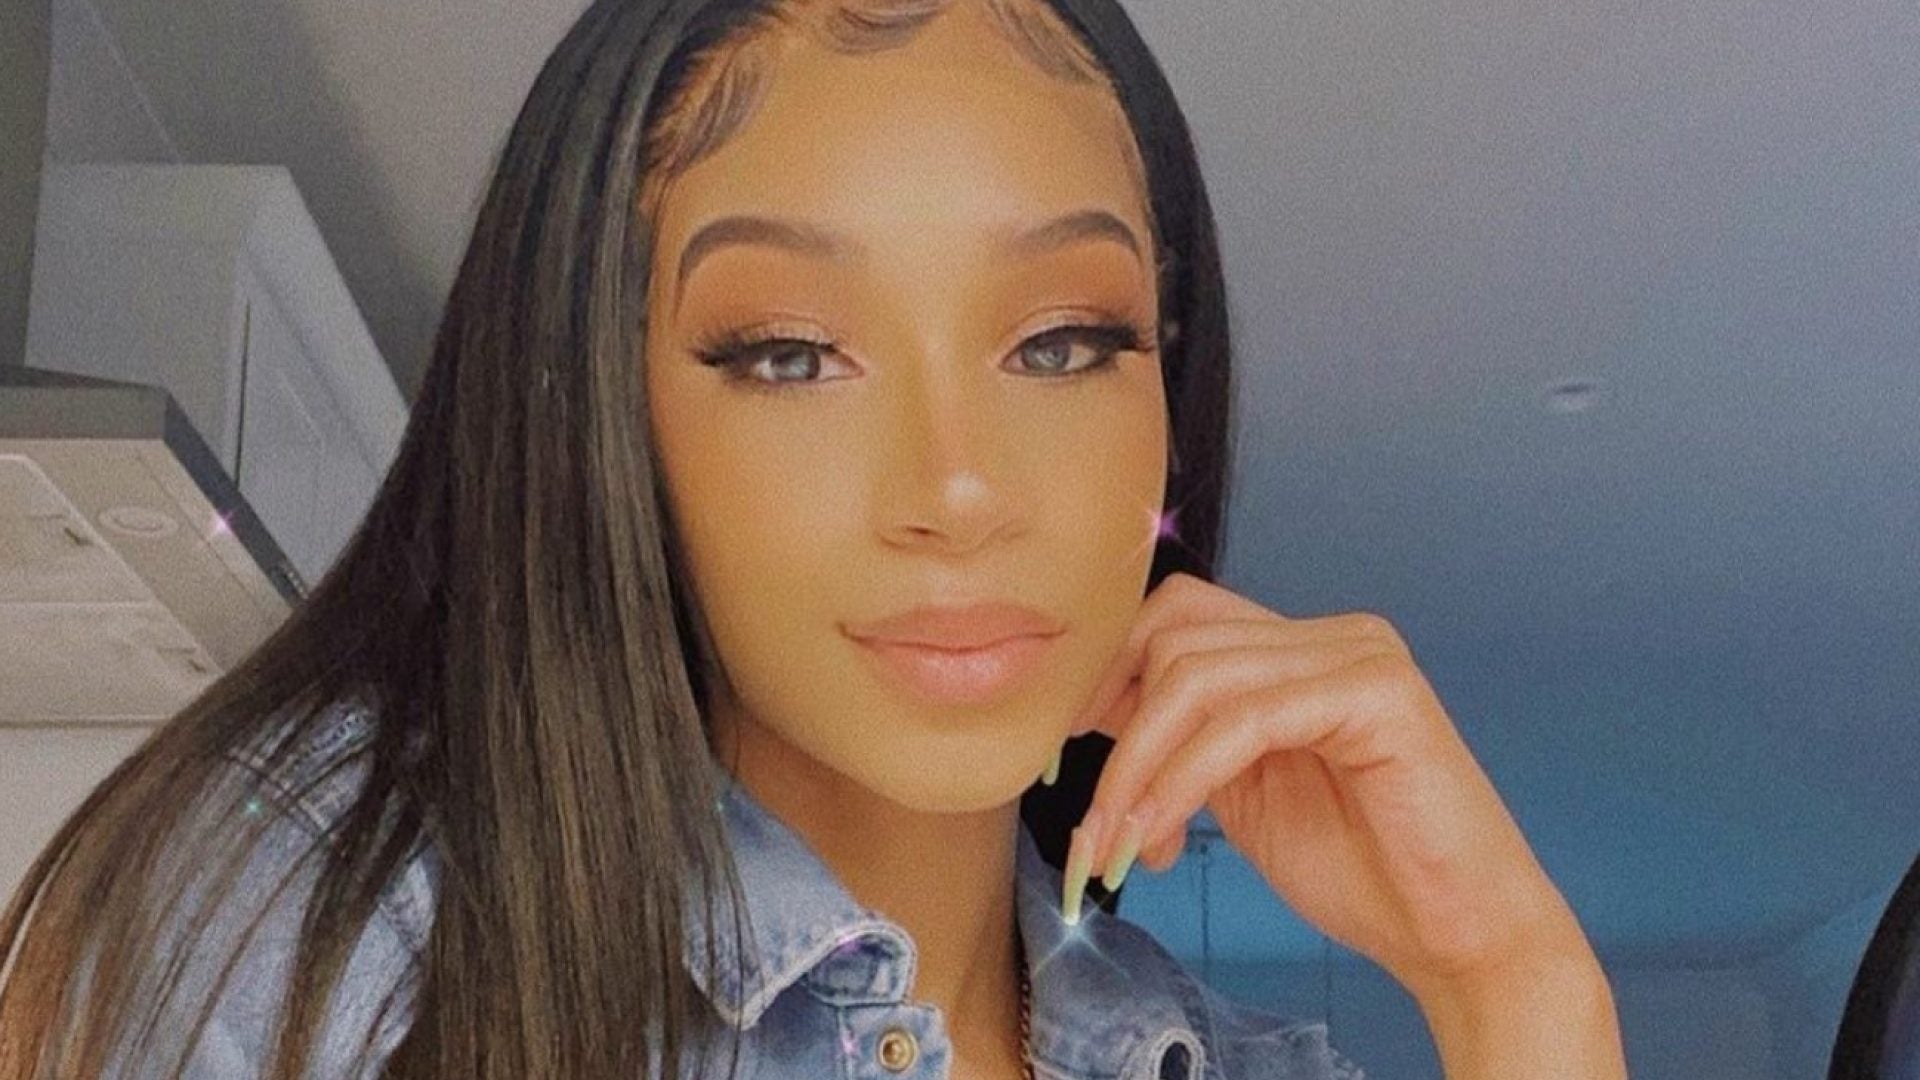 T.I.'s Daughter Deyjah Harris Bravely Reveals Her Scars While Sharing Message About Self-Harm